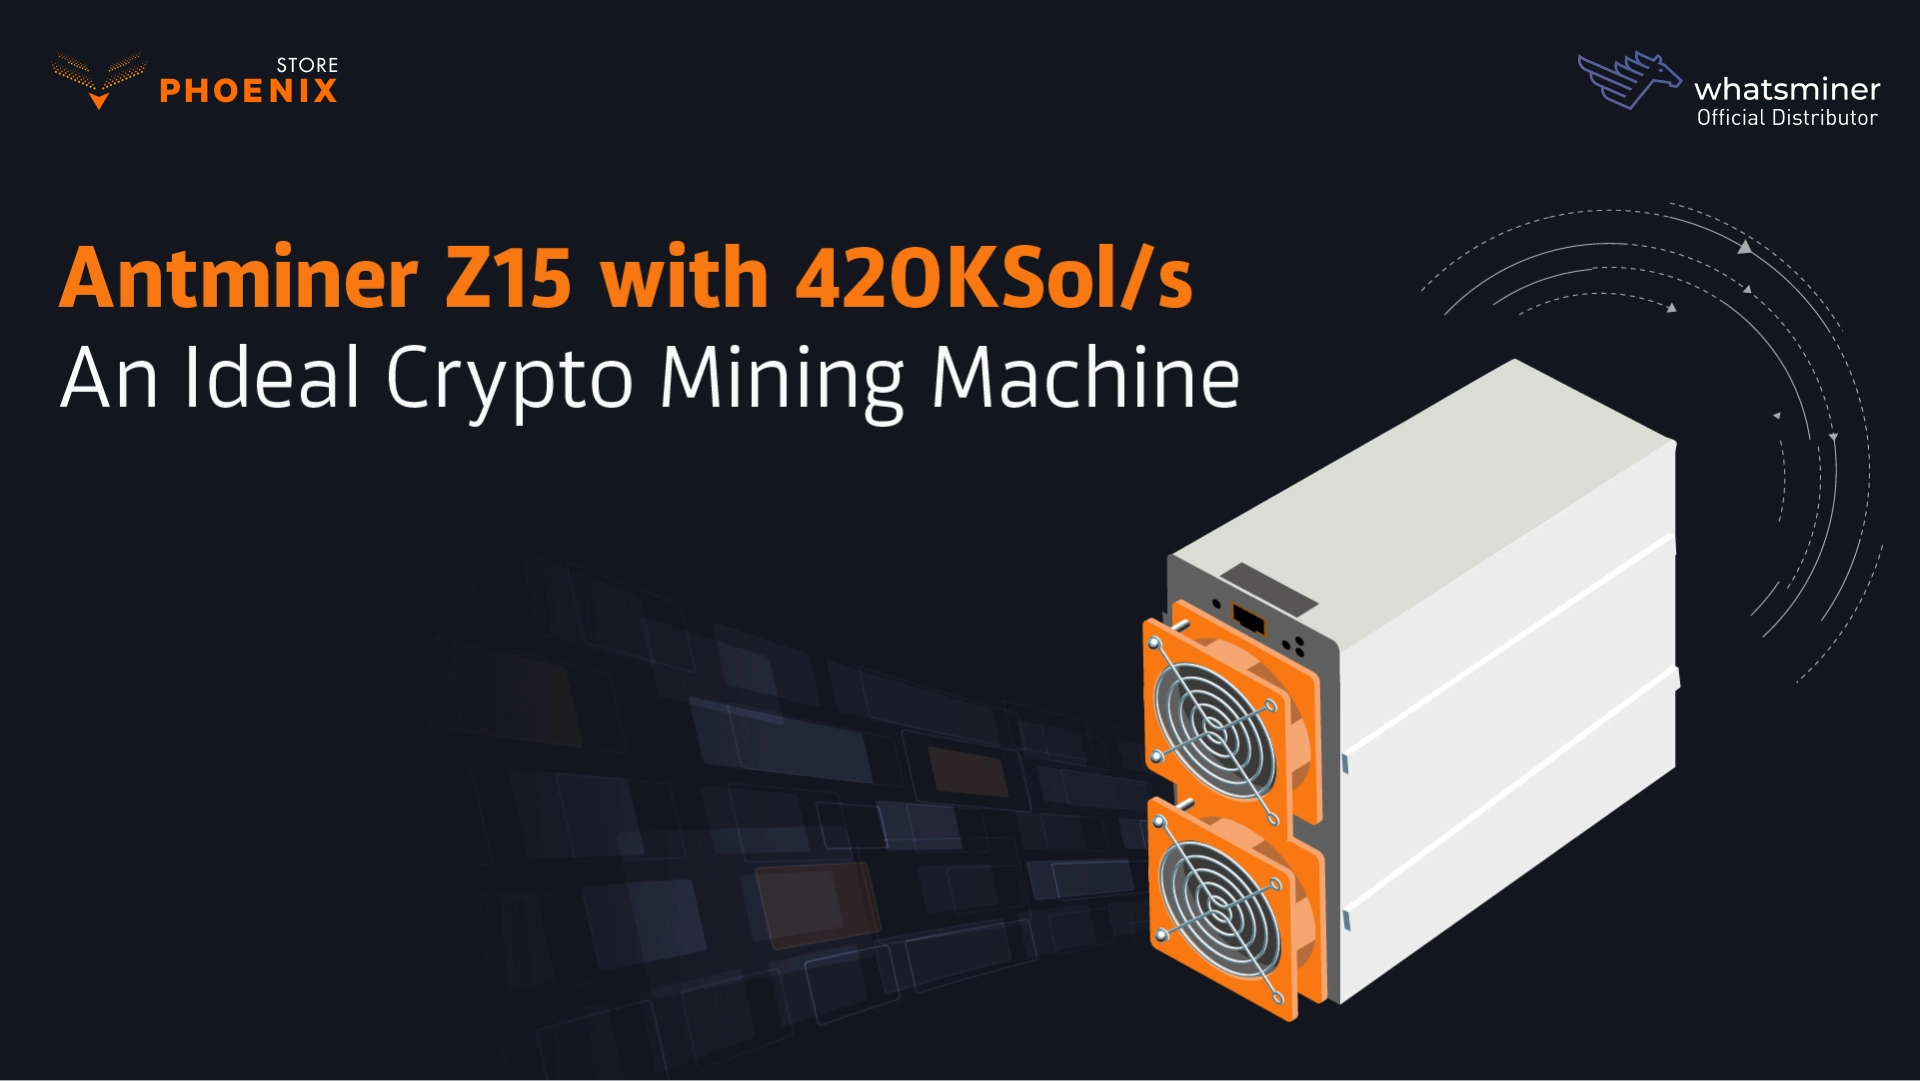 Antminer Z15 with 420KSol/s—An Ideal Crypto Mining Machine